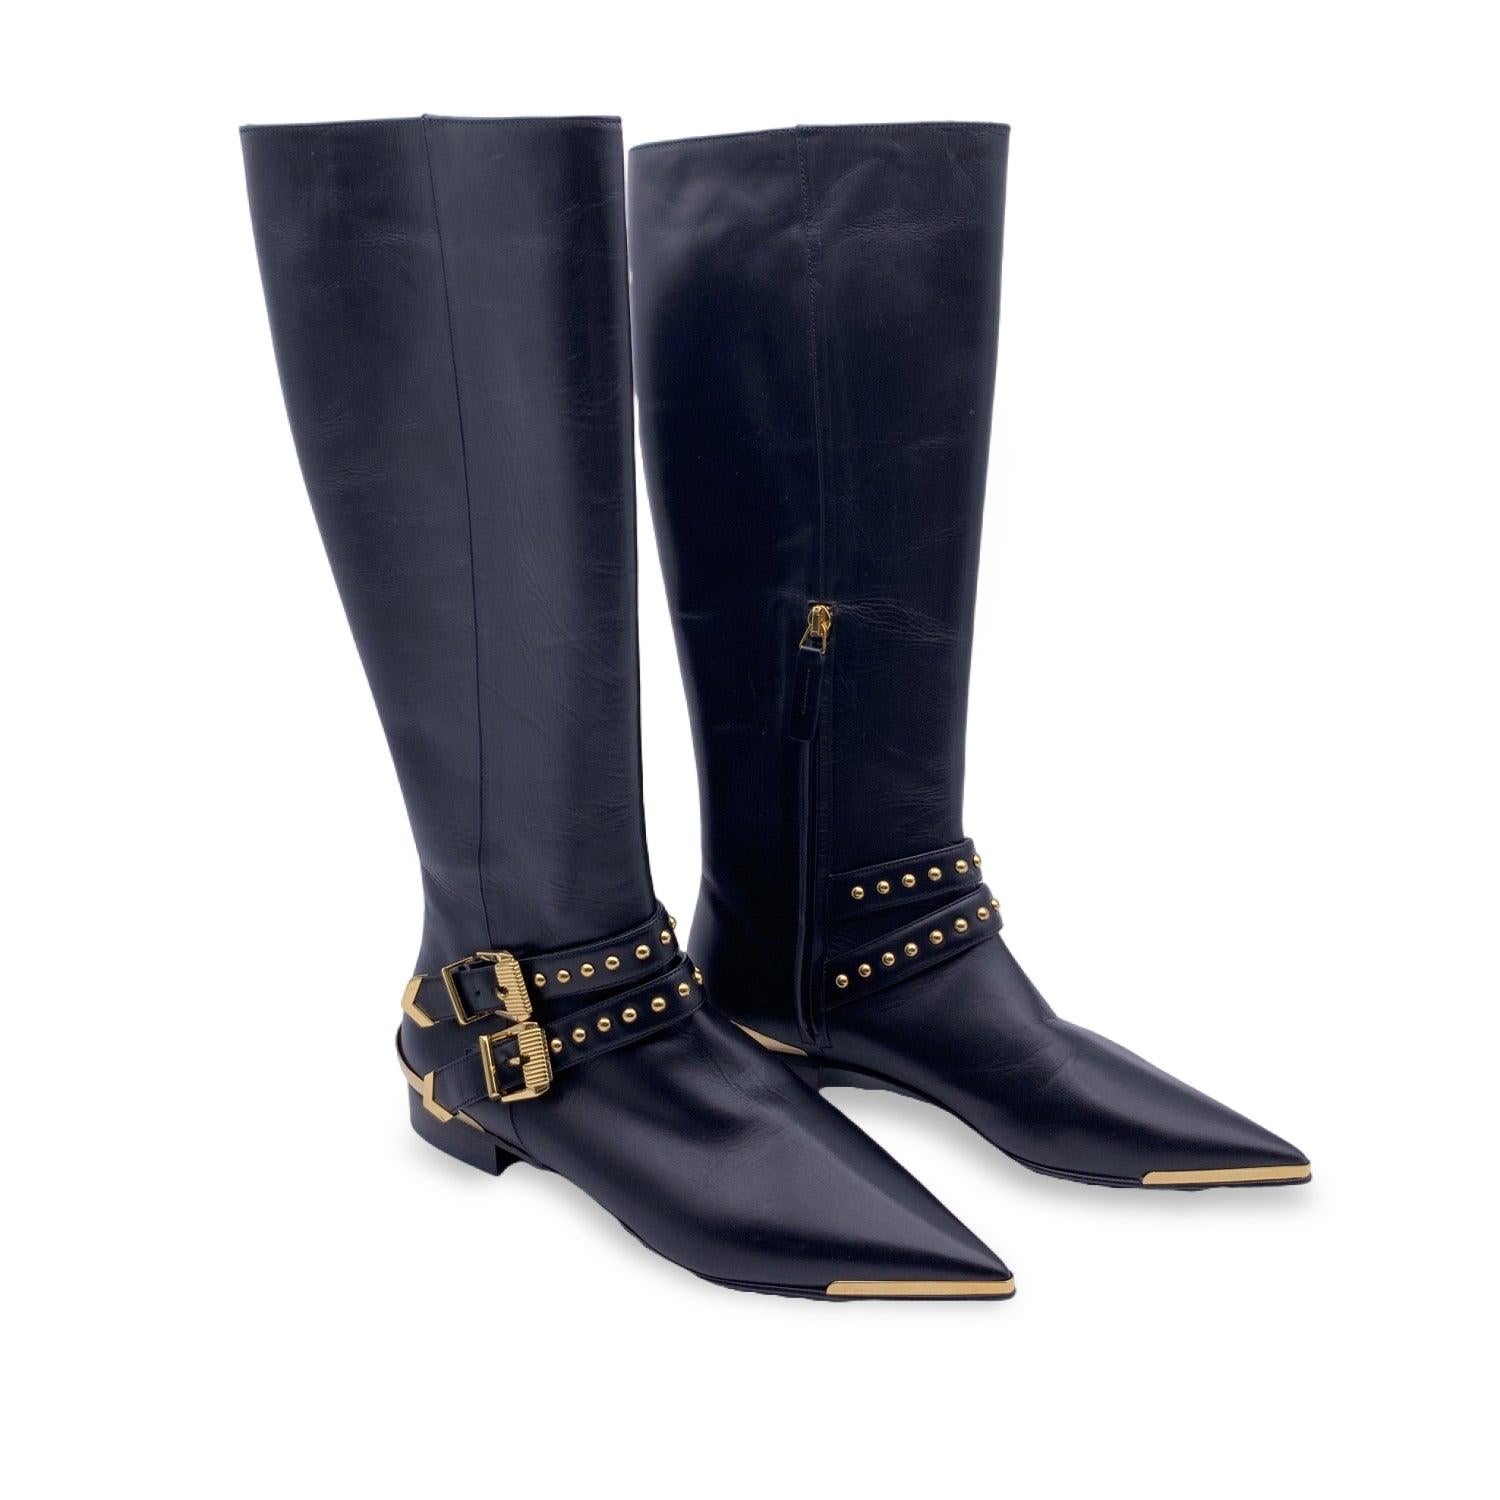 Versace Black Leather Riding Boots with Gold Metal Buckles Size 36 In Excellent Condition For Sale In Rome, Rome